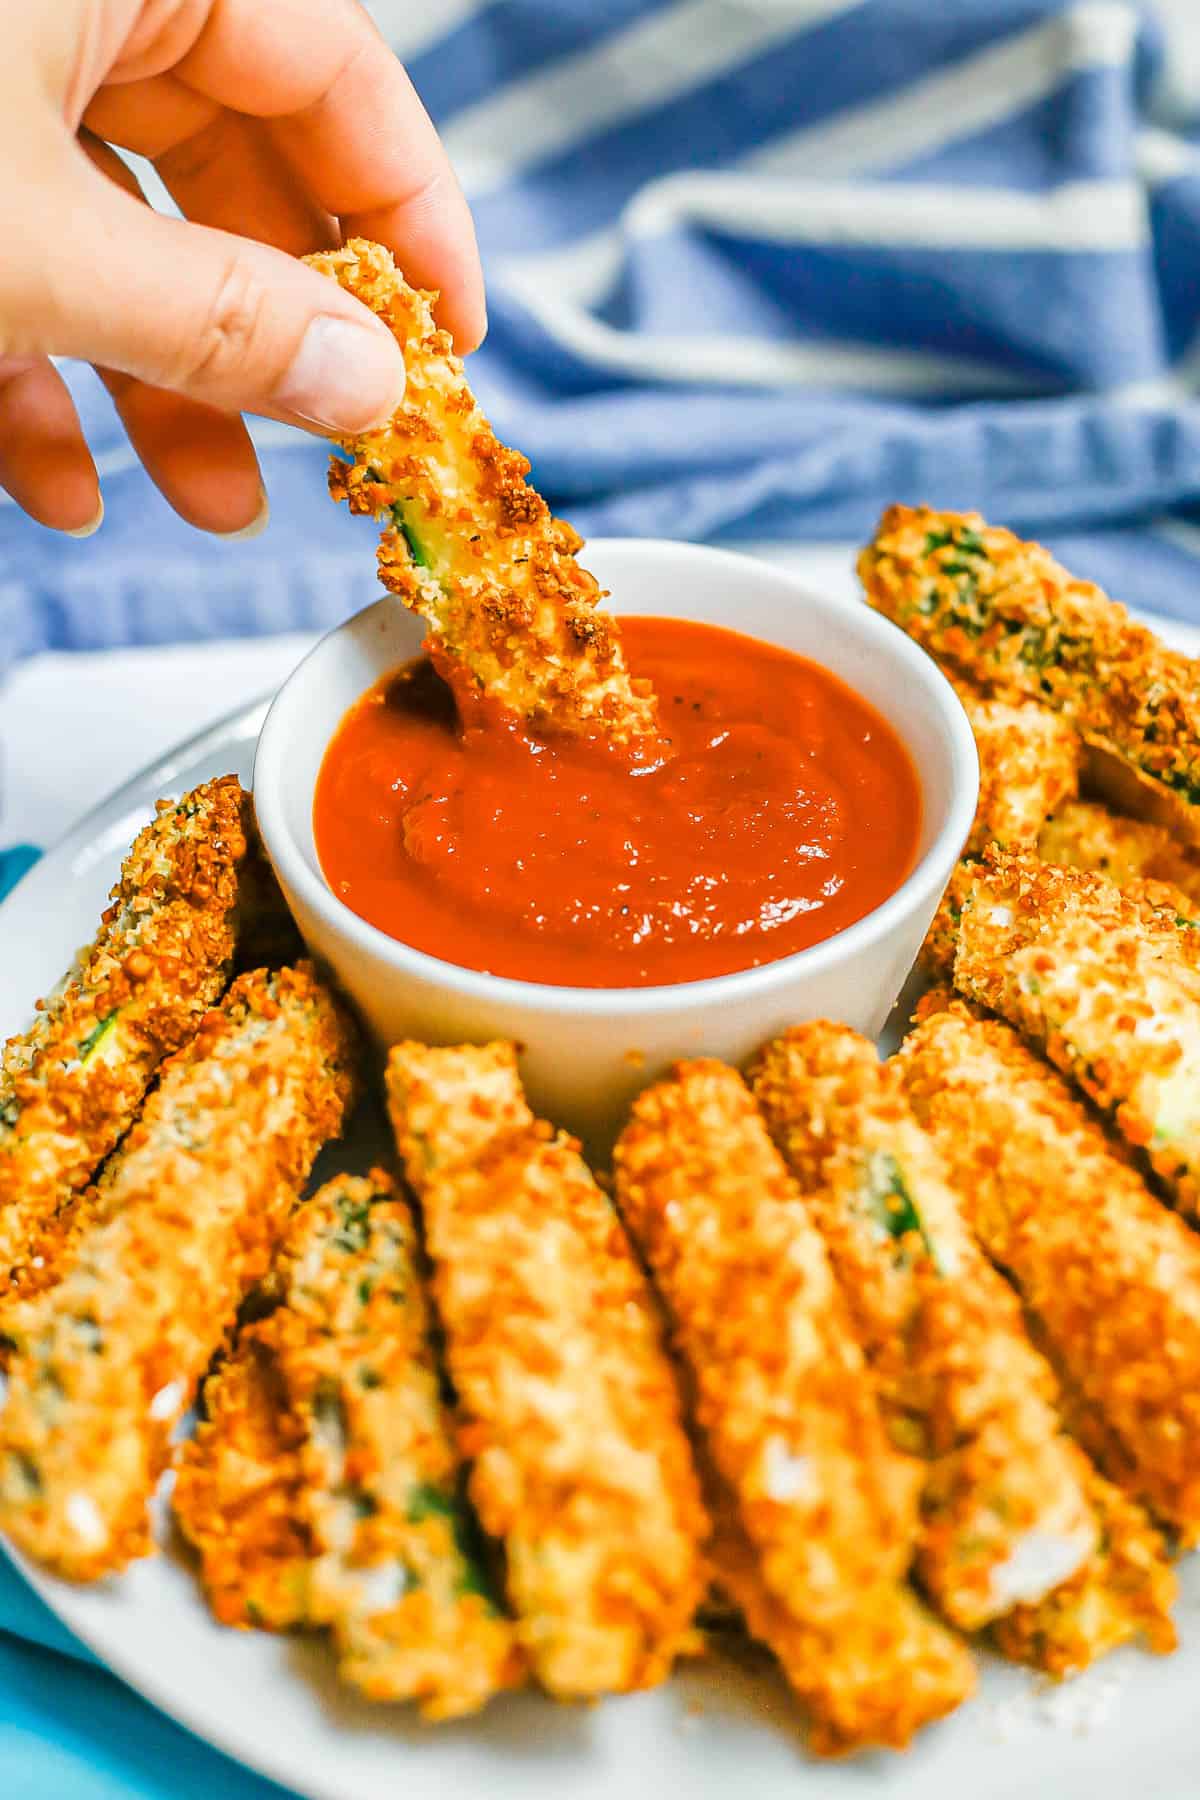 A hand dipping a golden brown breaded zucchini stick in a small bowl of marinara.